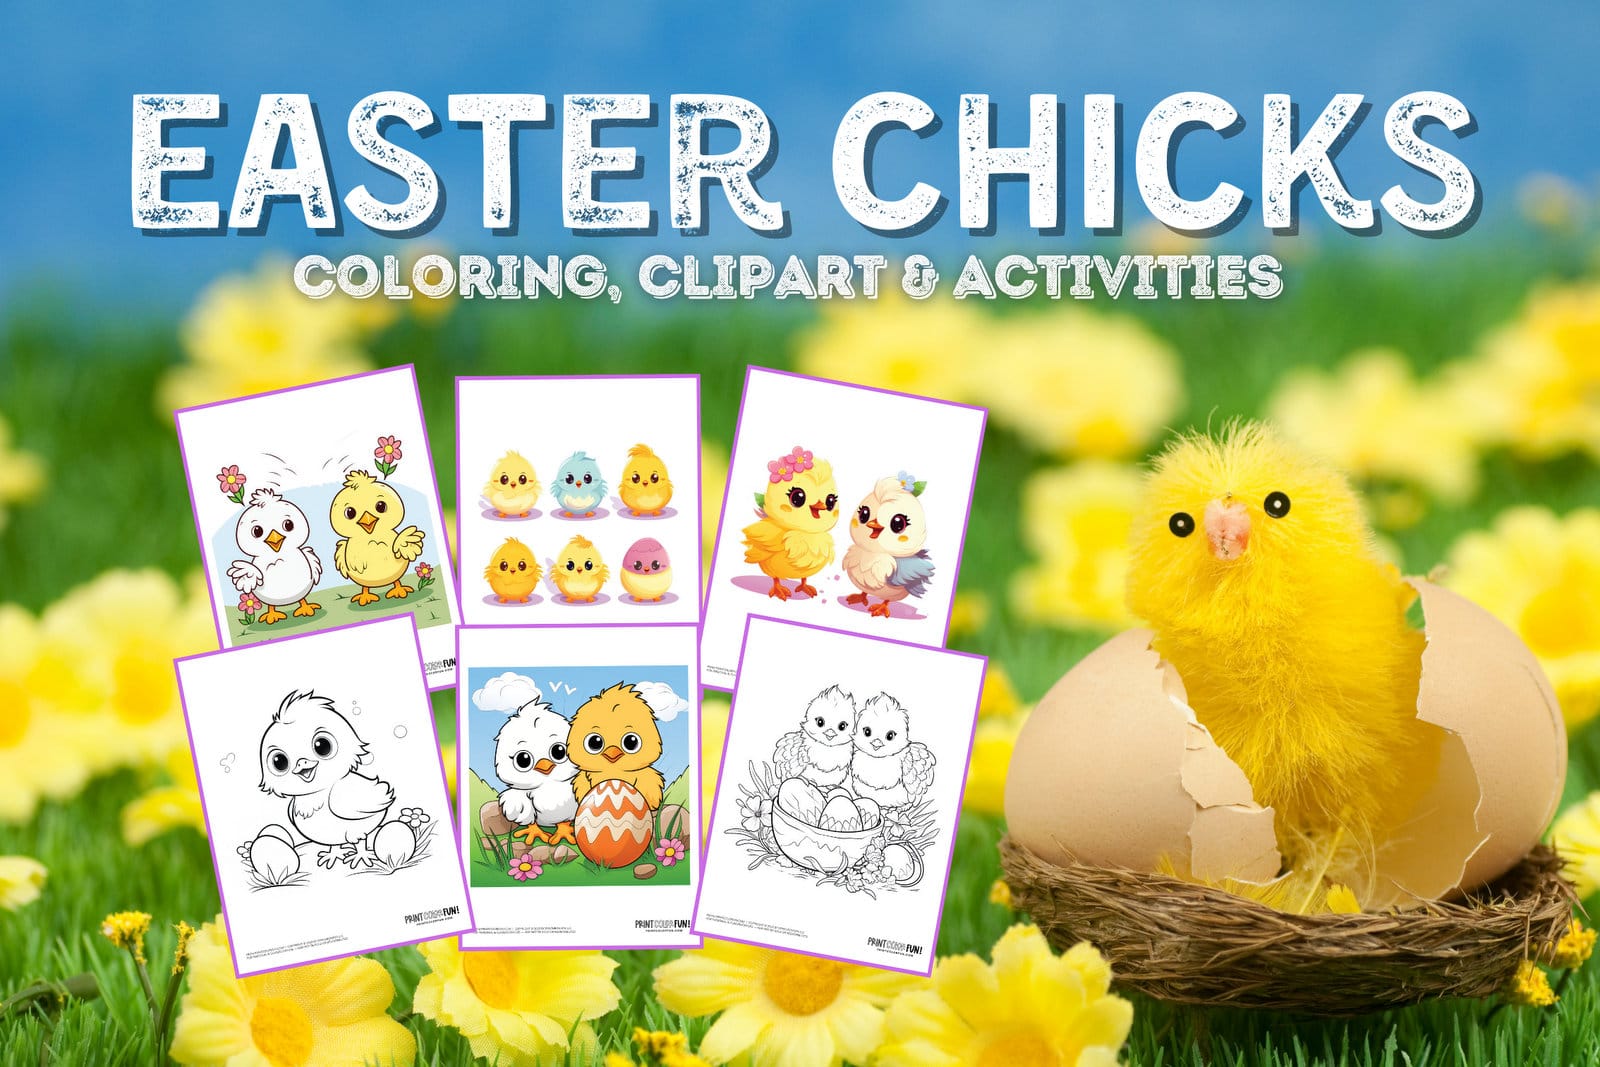 Easter chick clipart and coloring pages for springtime at PrintColorFun com